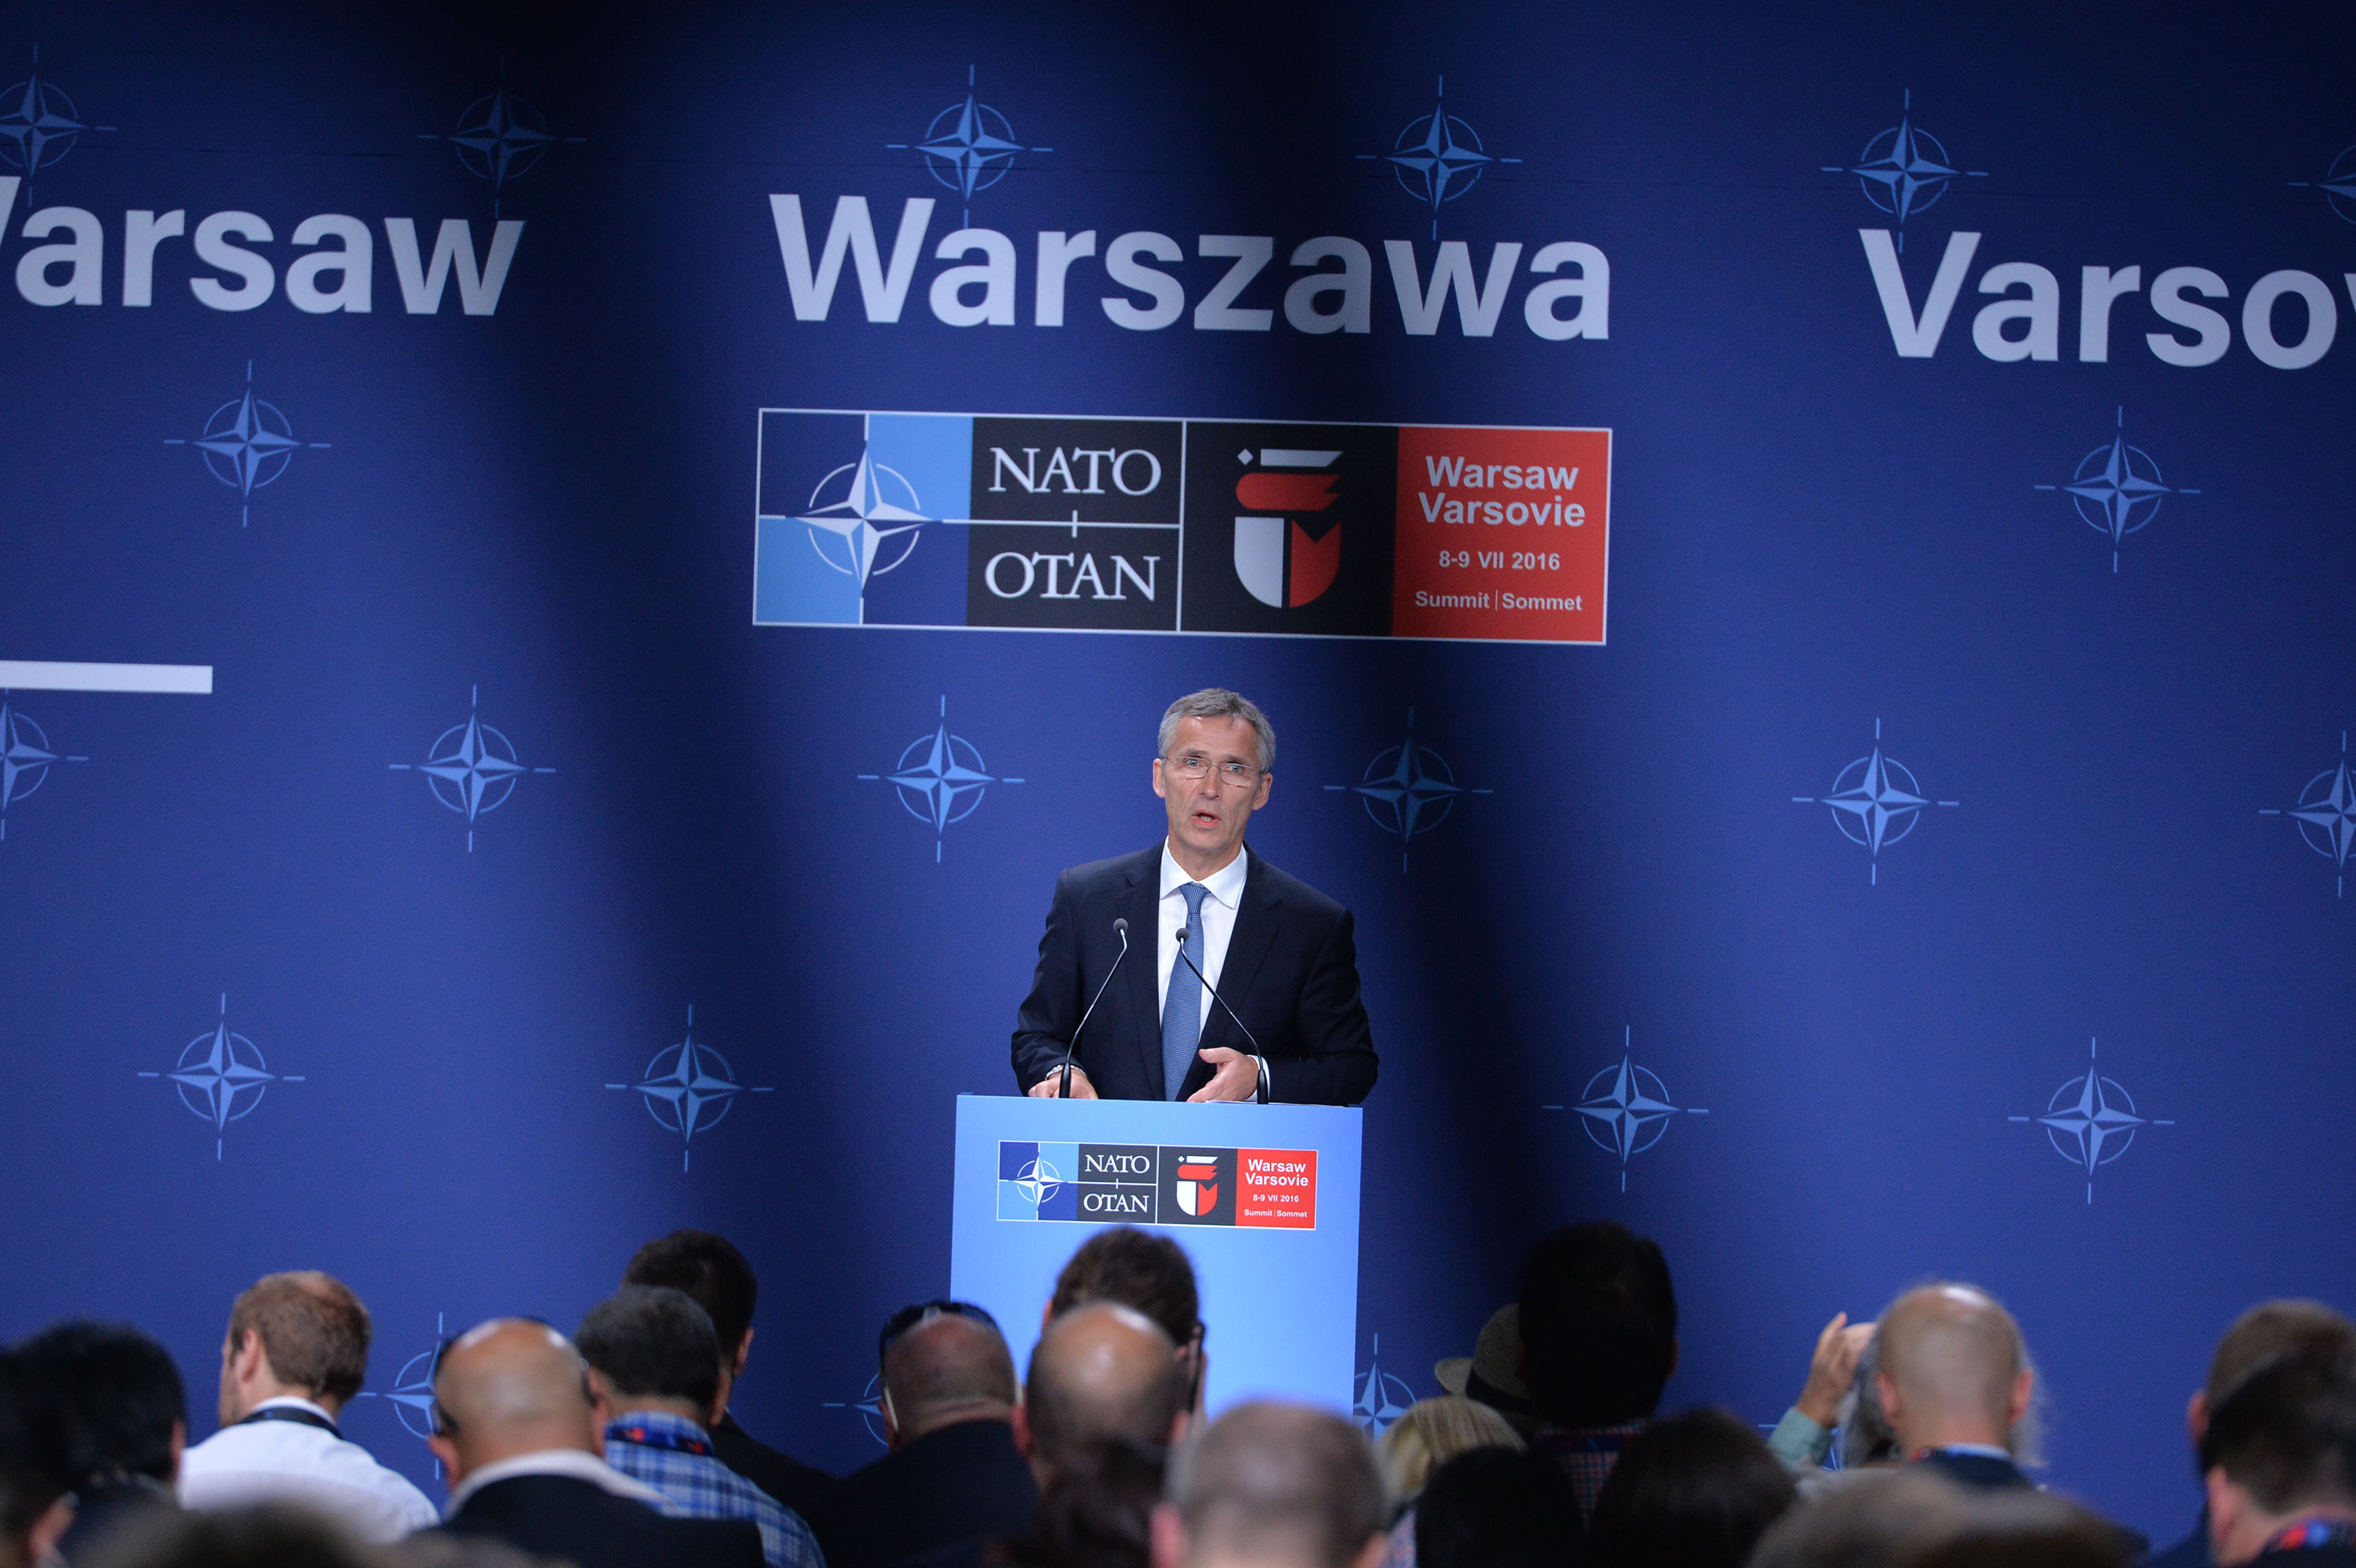 Press conference by NATO Secretary General Jens Stoltenberg following the North Atlantic Council meeting at the level of Heads of State and Government